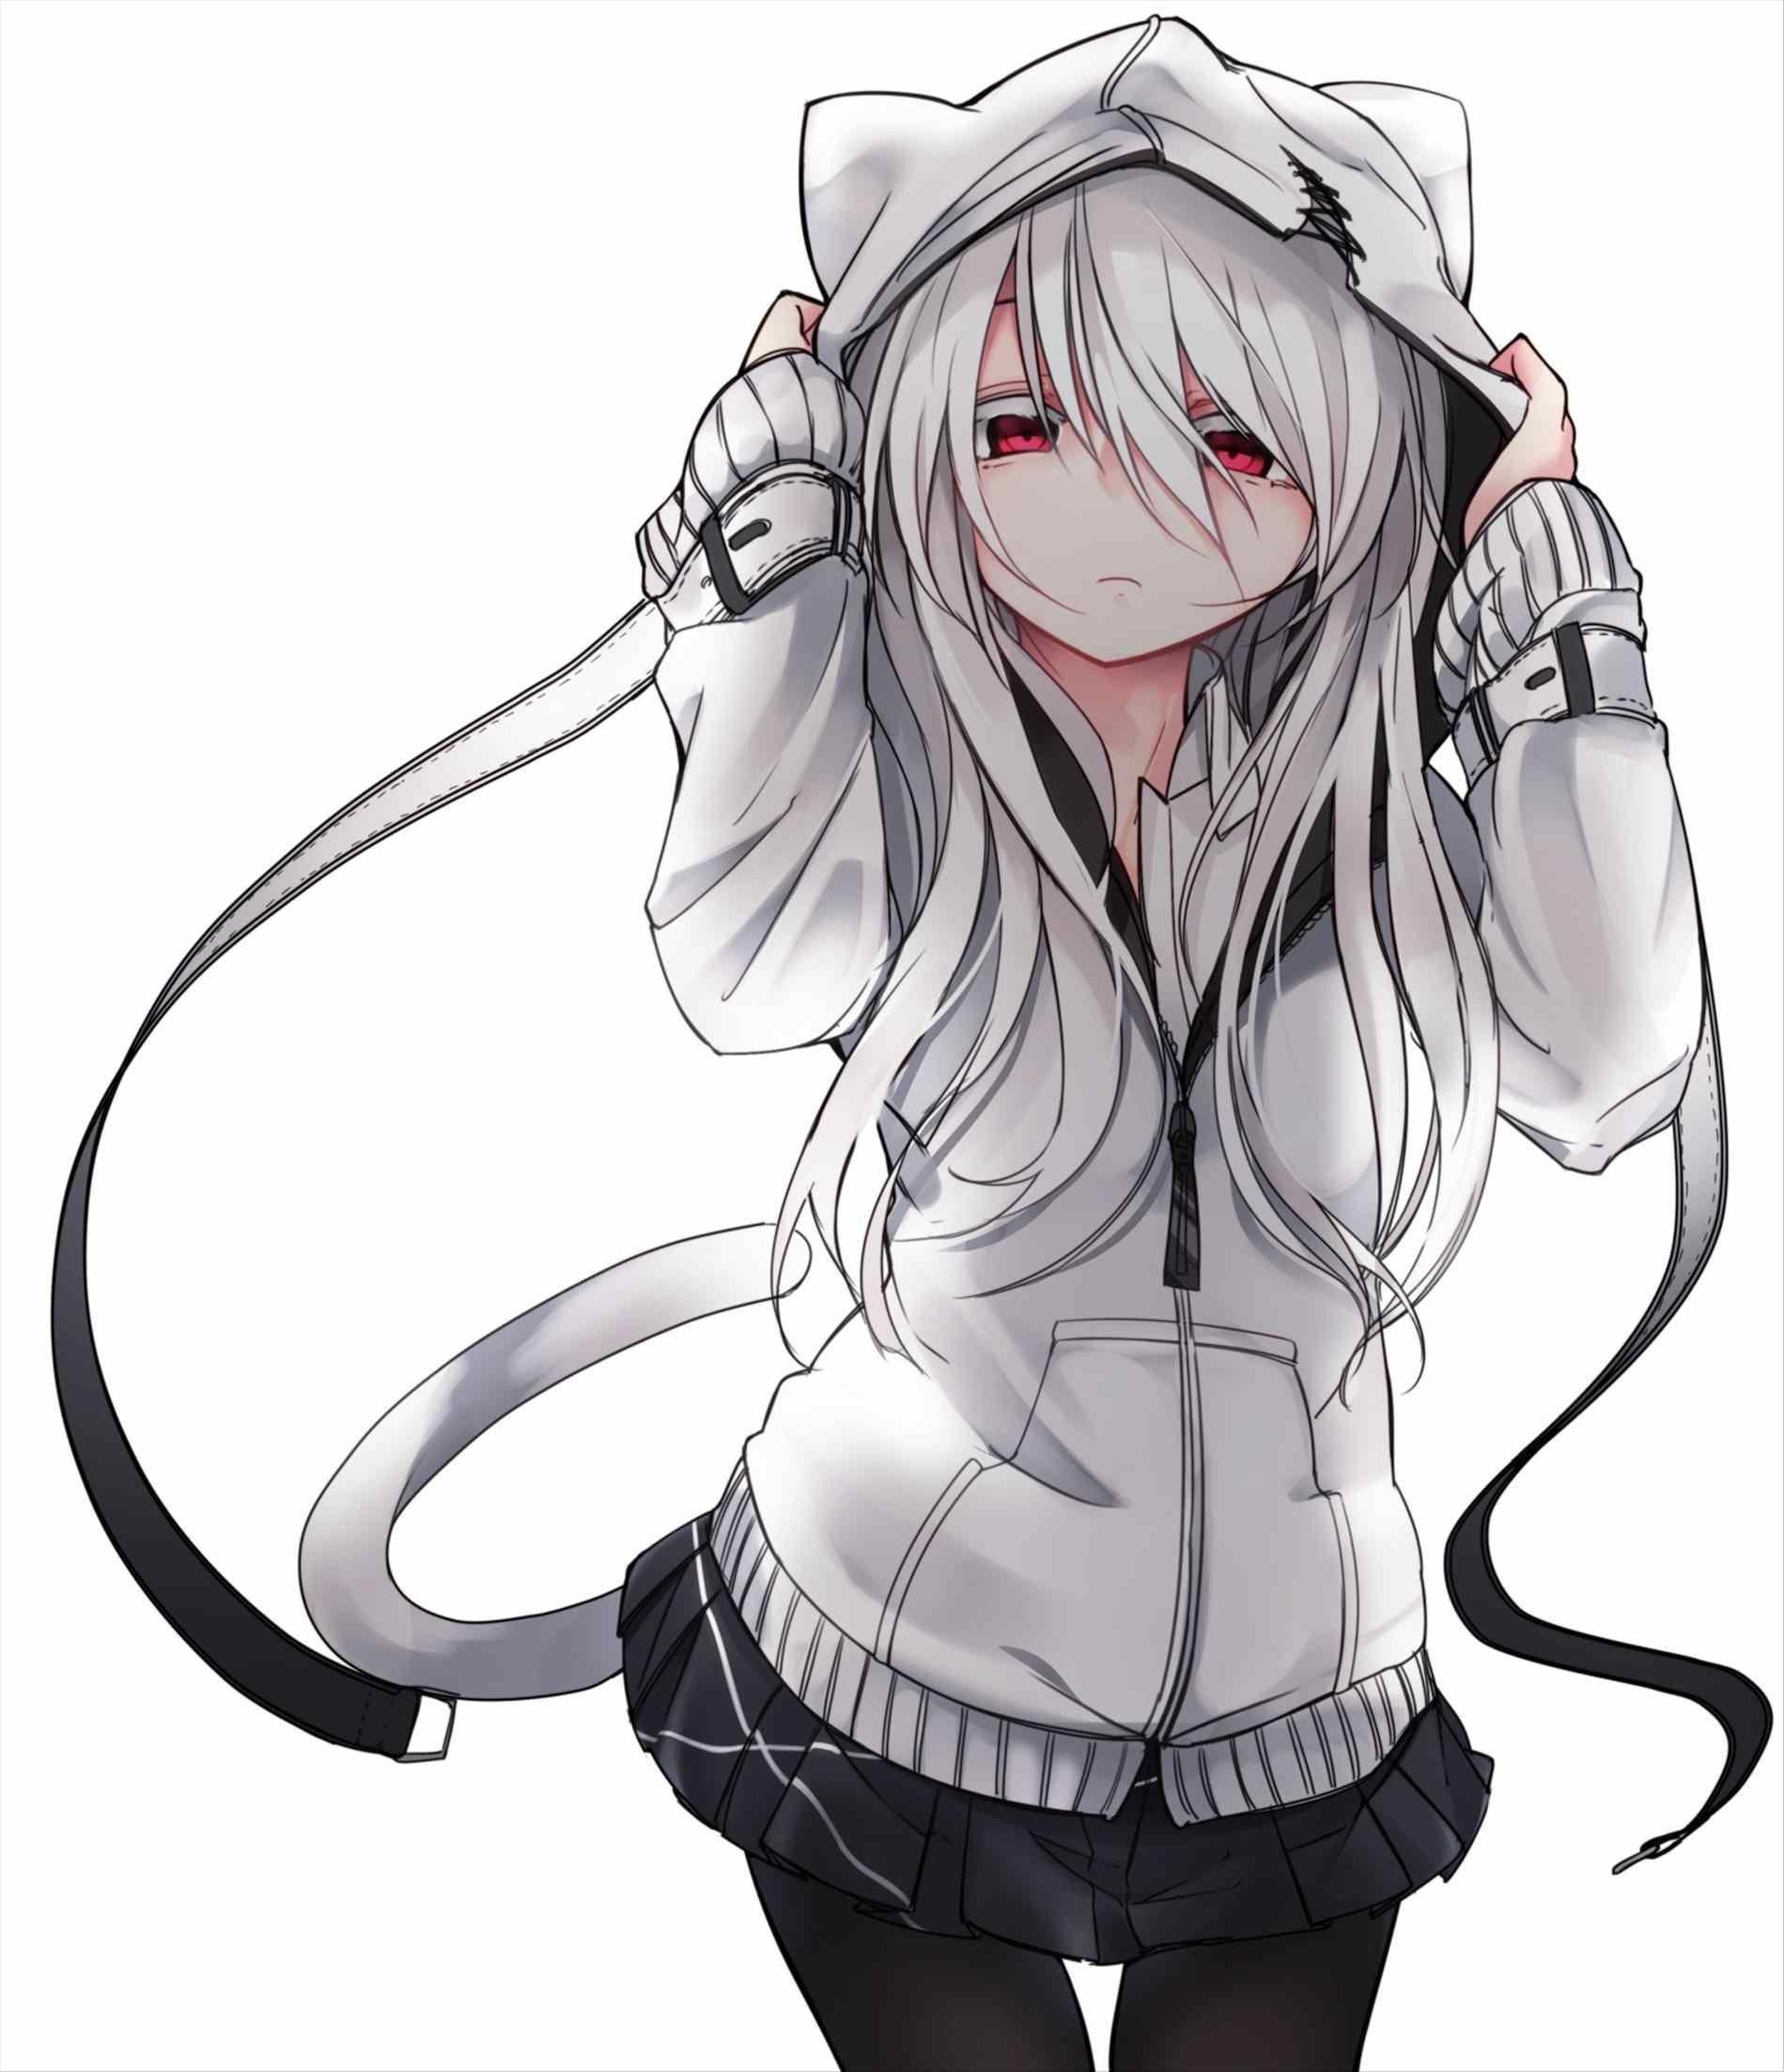 Kawaii Anime Girl White Hair And Red Eyes Wallpapers - Wallpaper Cave